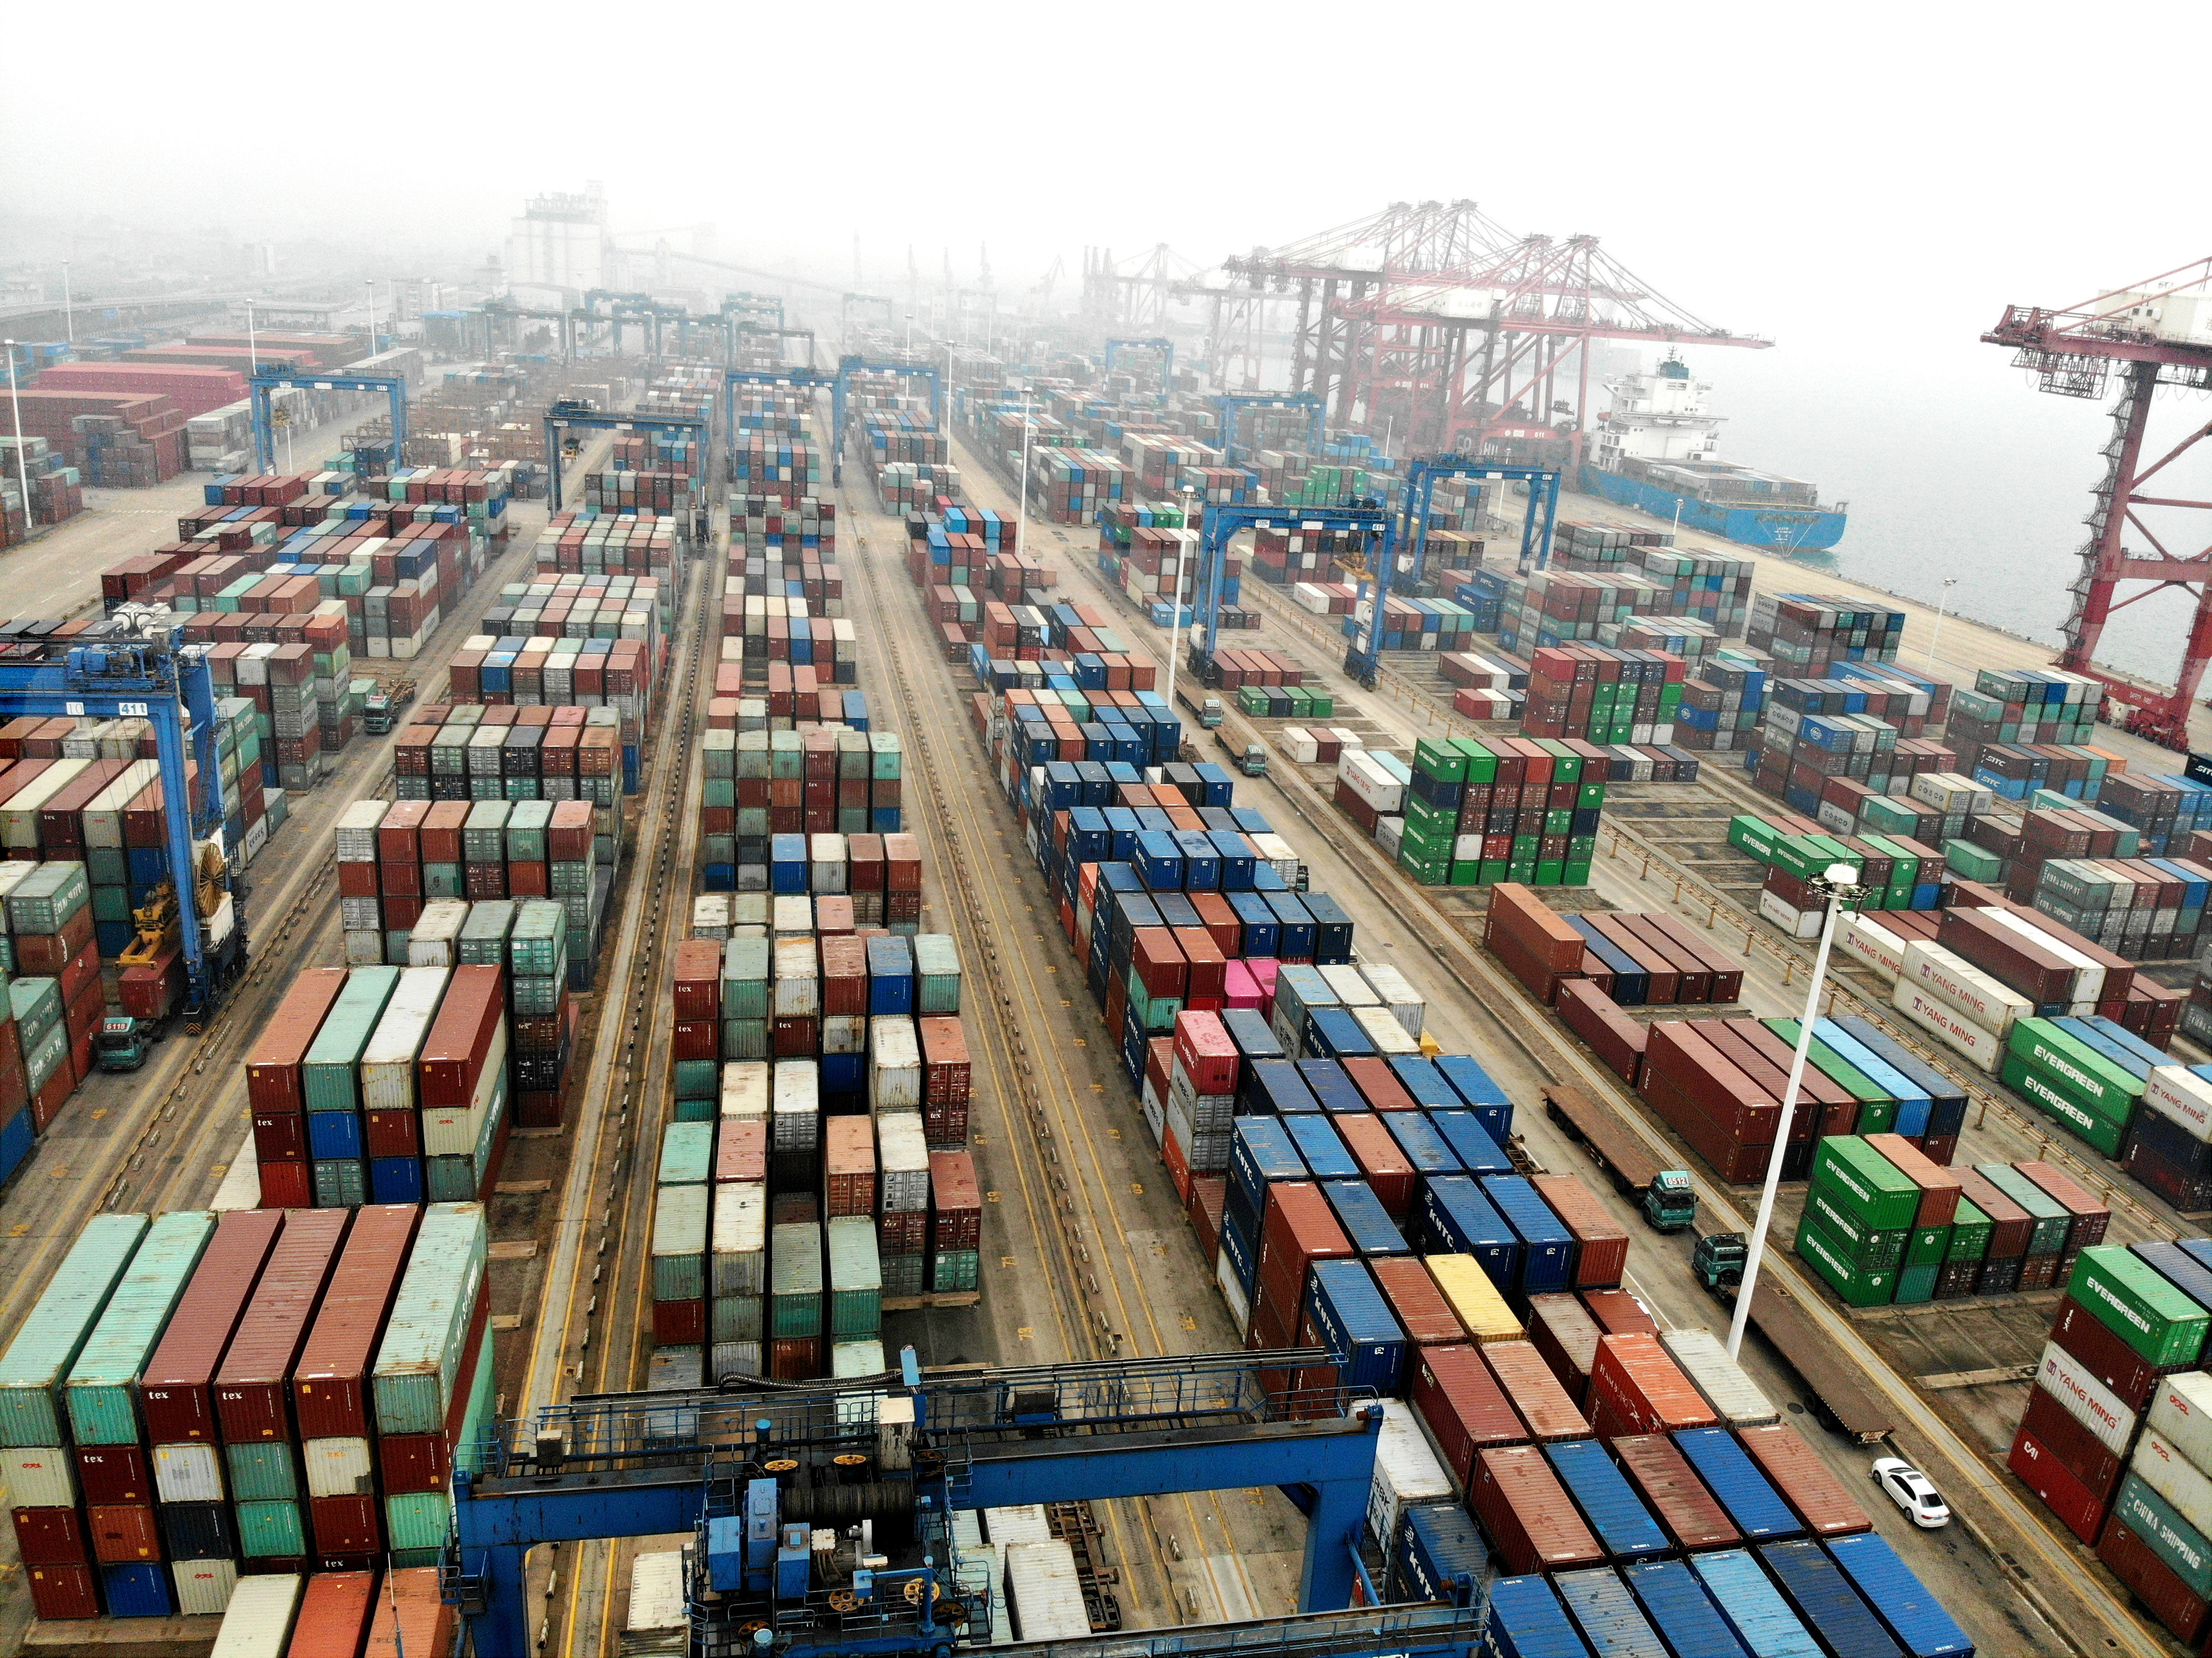 Containers stacked at the Lianyungang Port in eastern China’s Jiangsu province. Photo: Xinhua
.